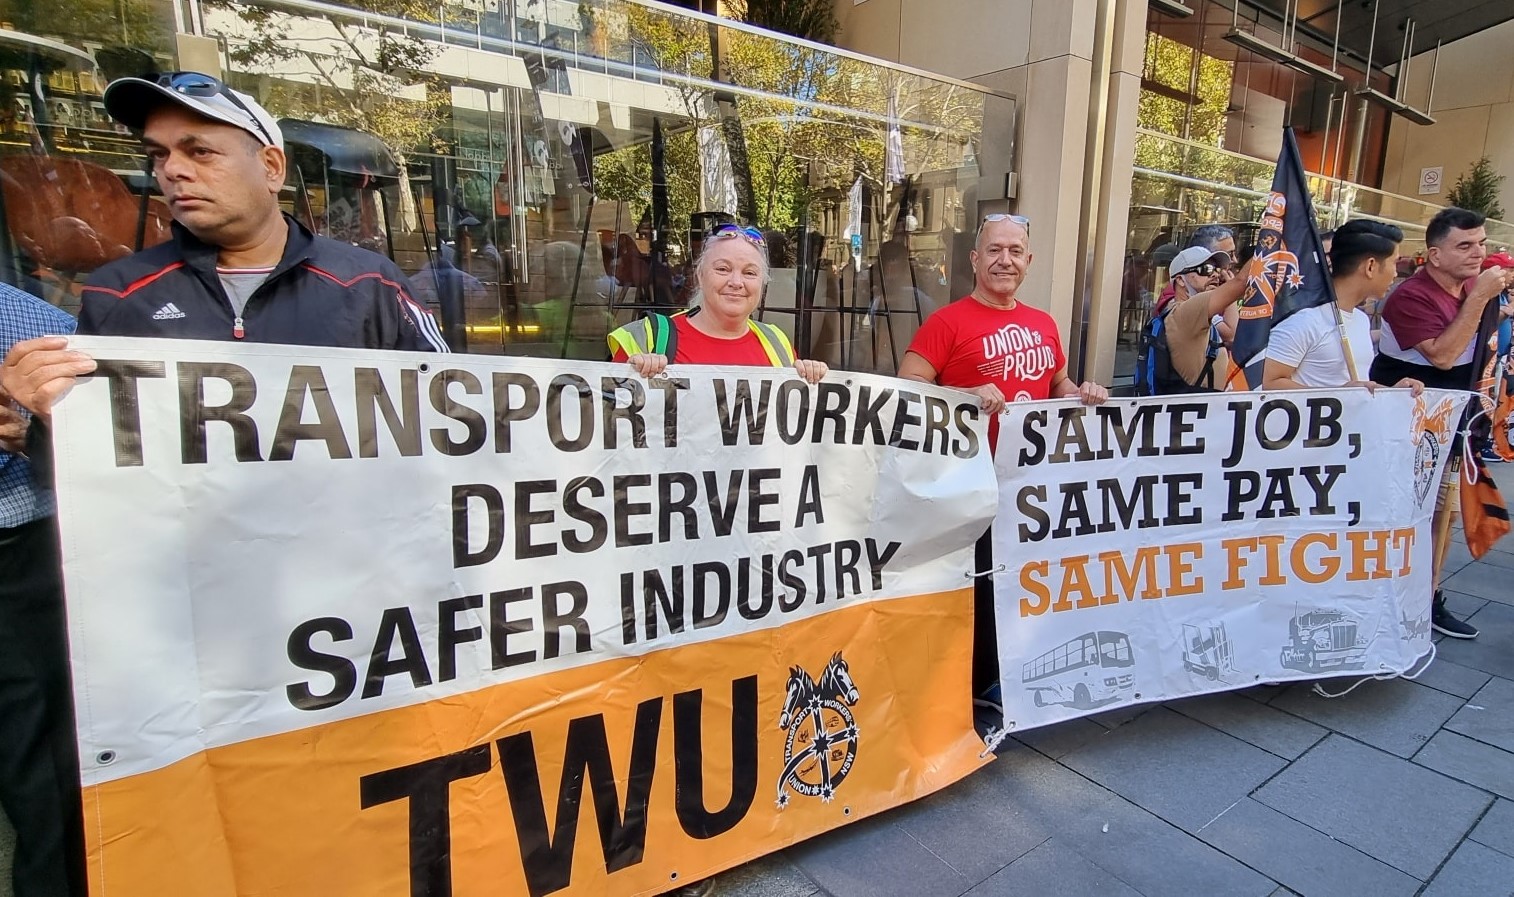 Transport workers gather at Martin Place for ‘safer and fairer’ bus standards